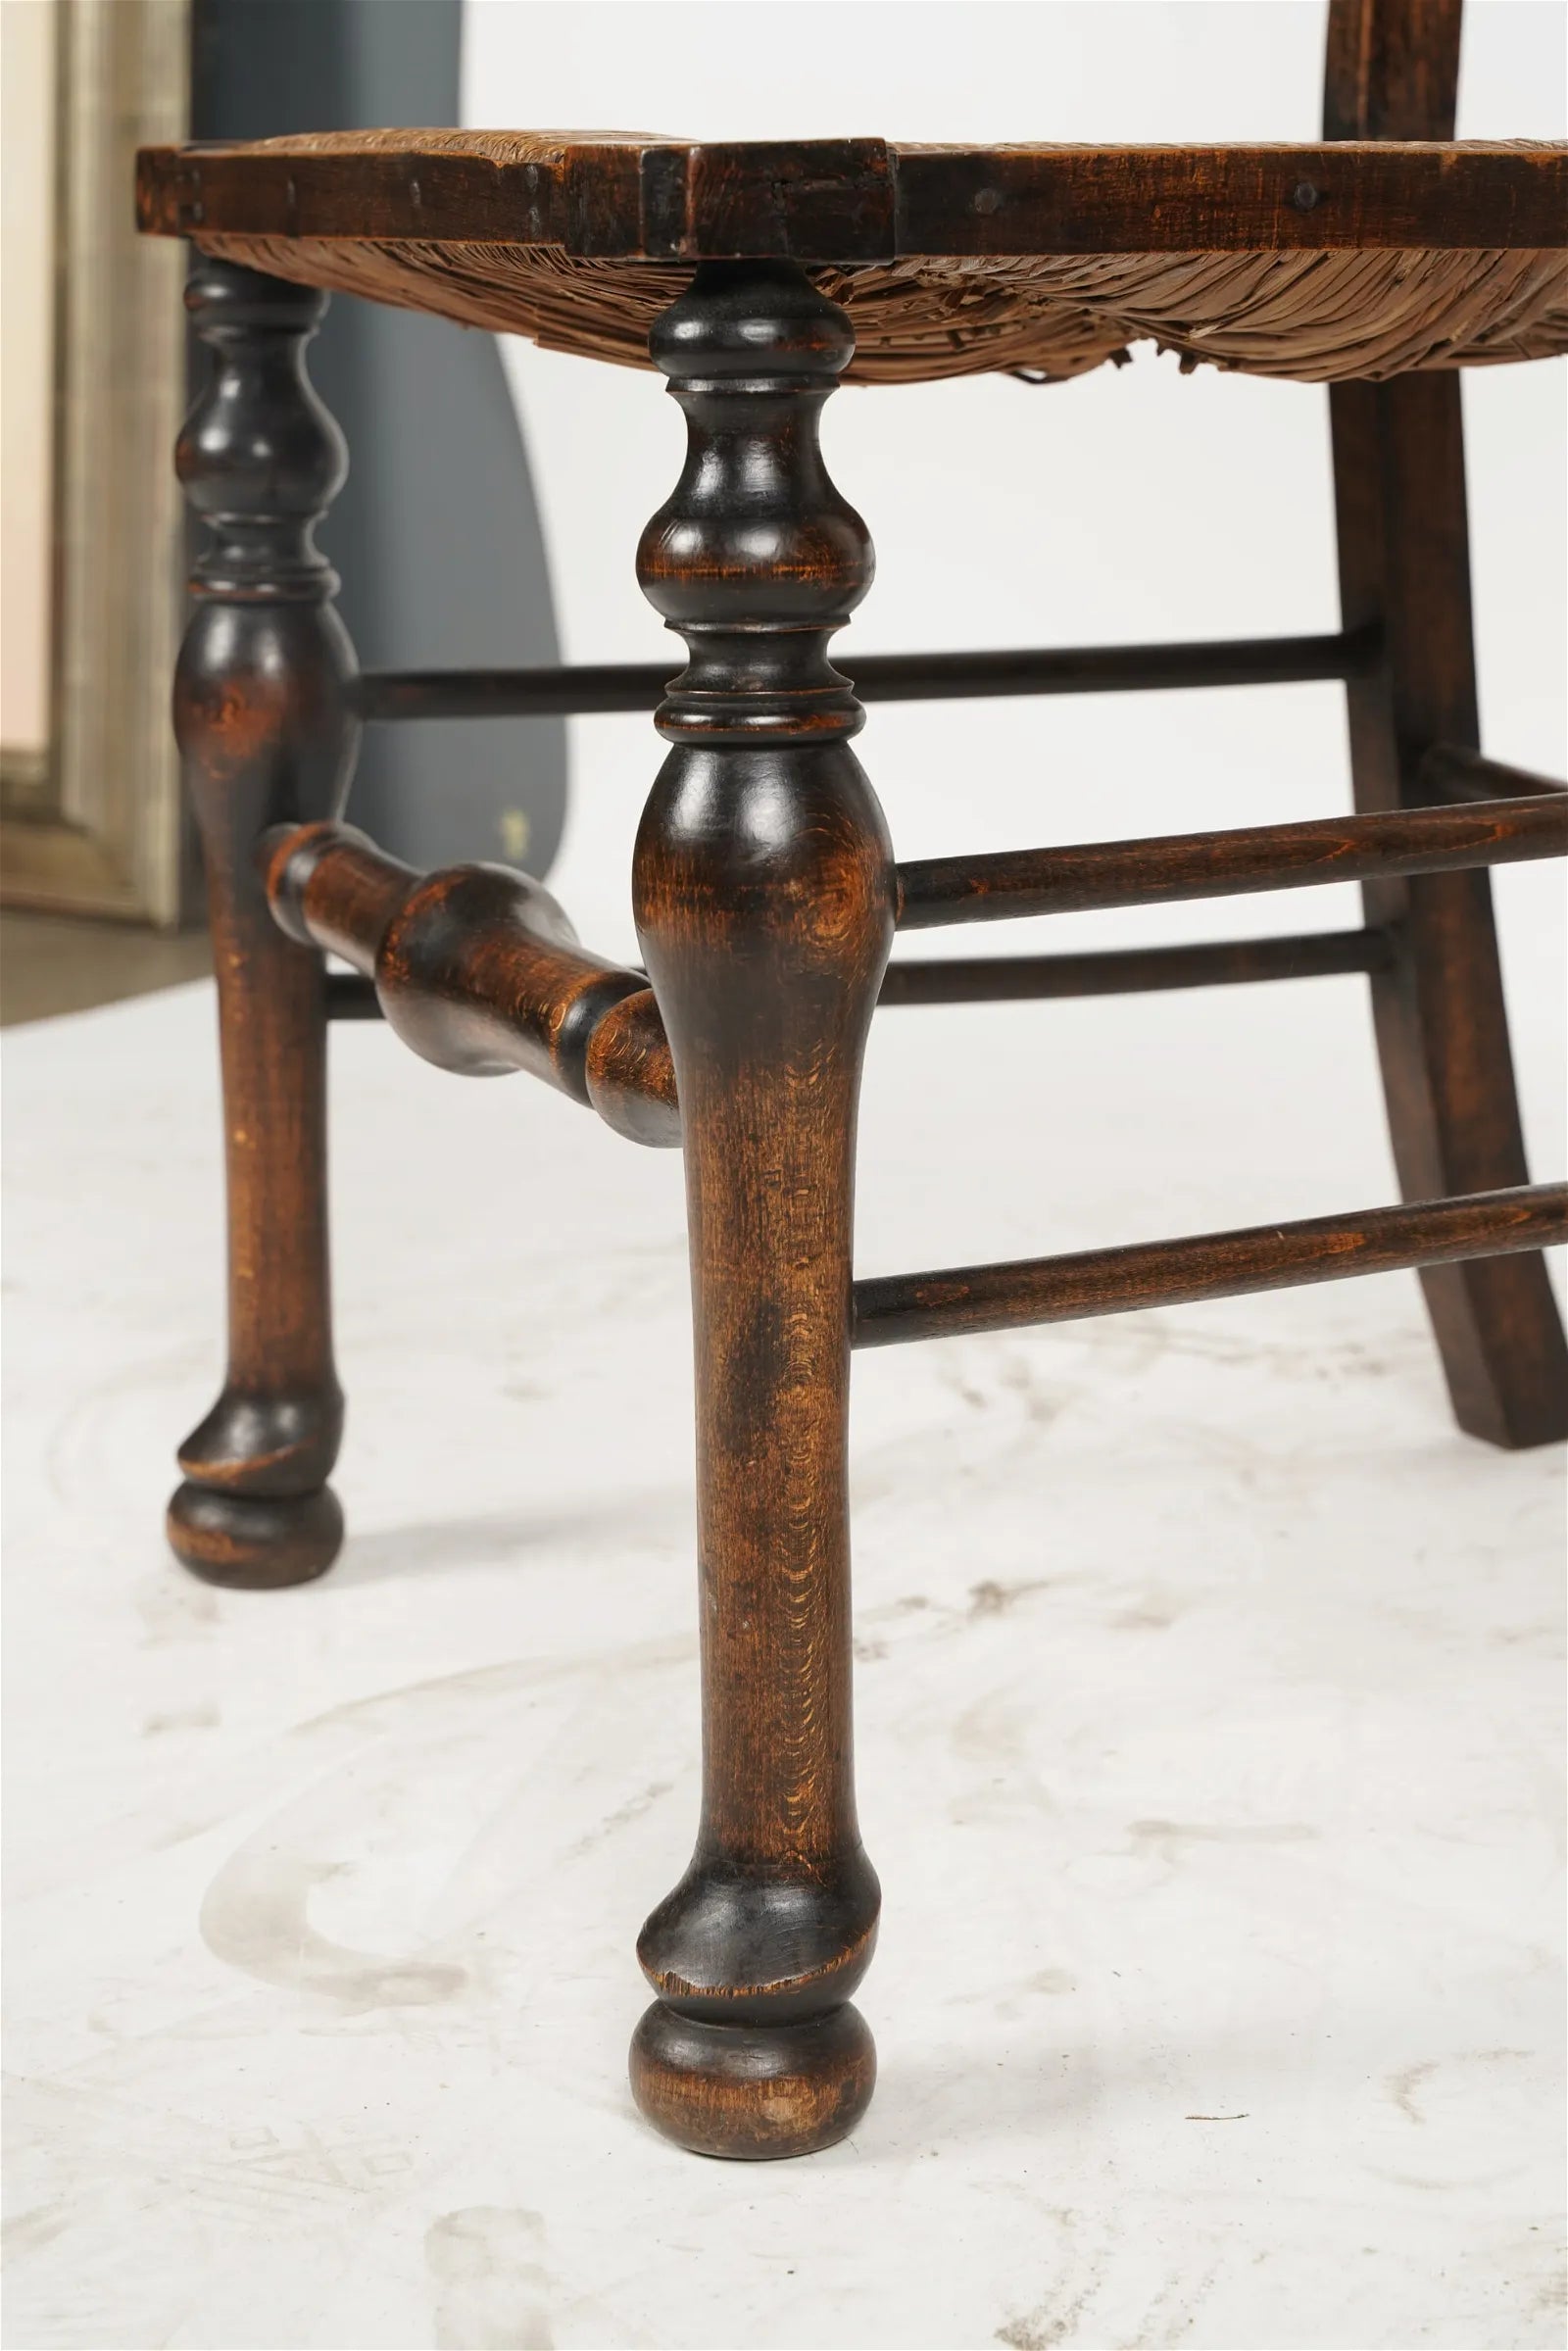 AF2-162: Antique Pair of Early 19th Century English Georgian Rush Seat Chairs